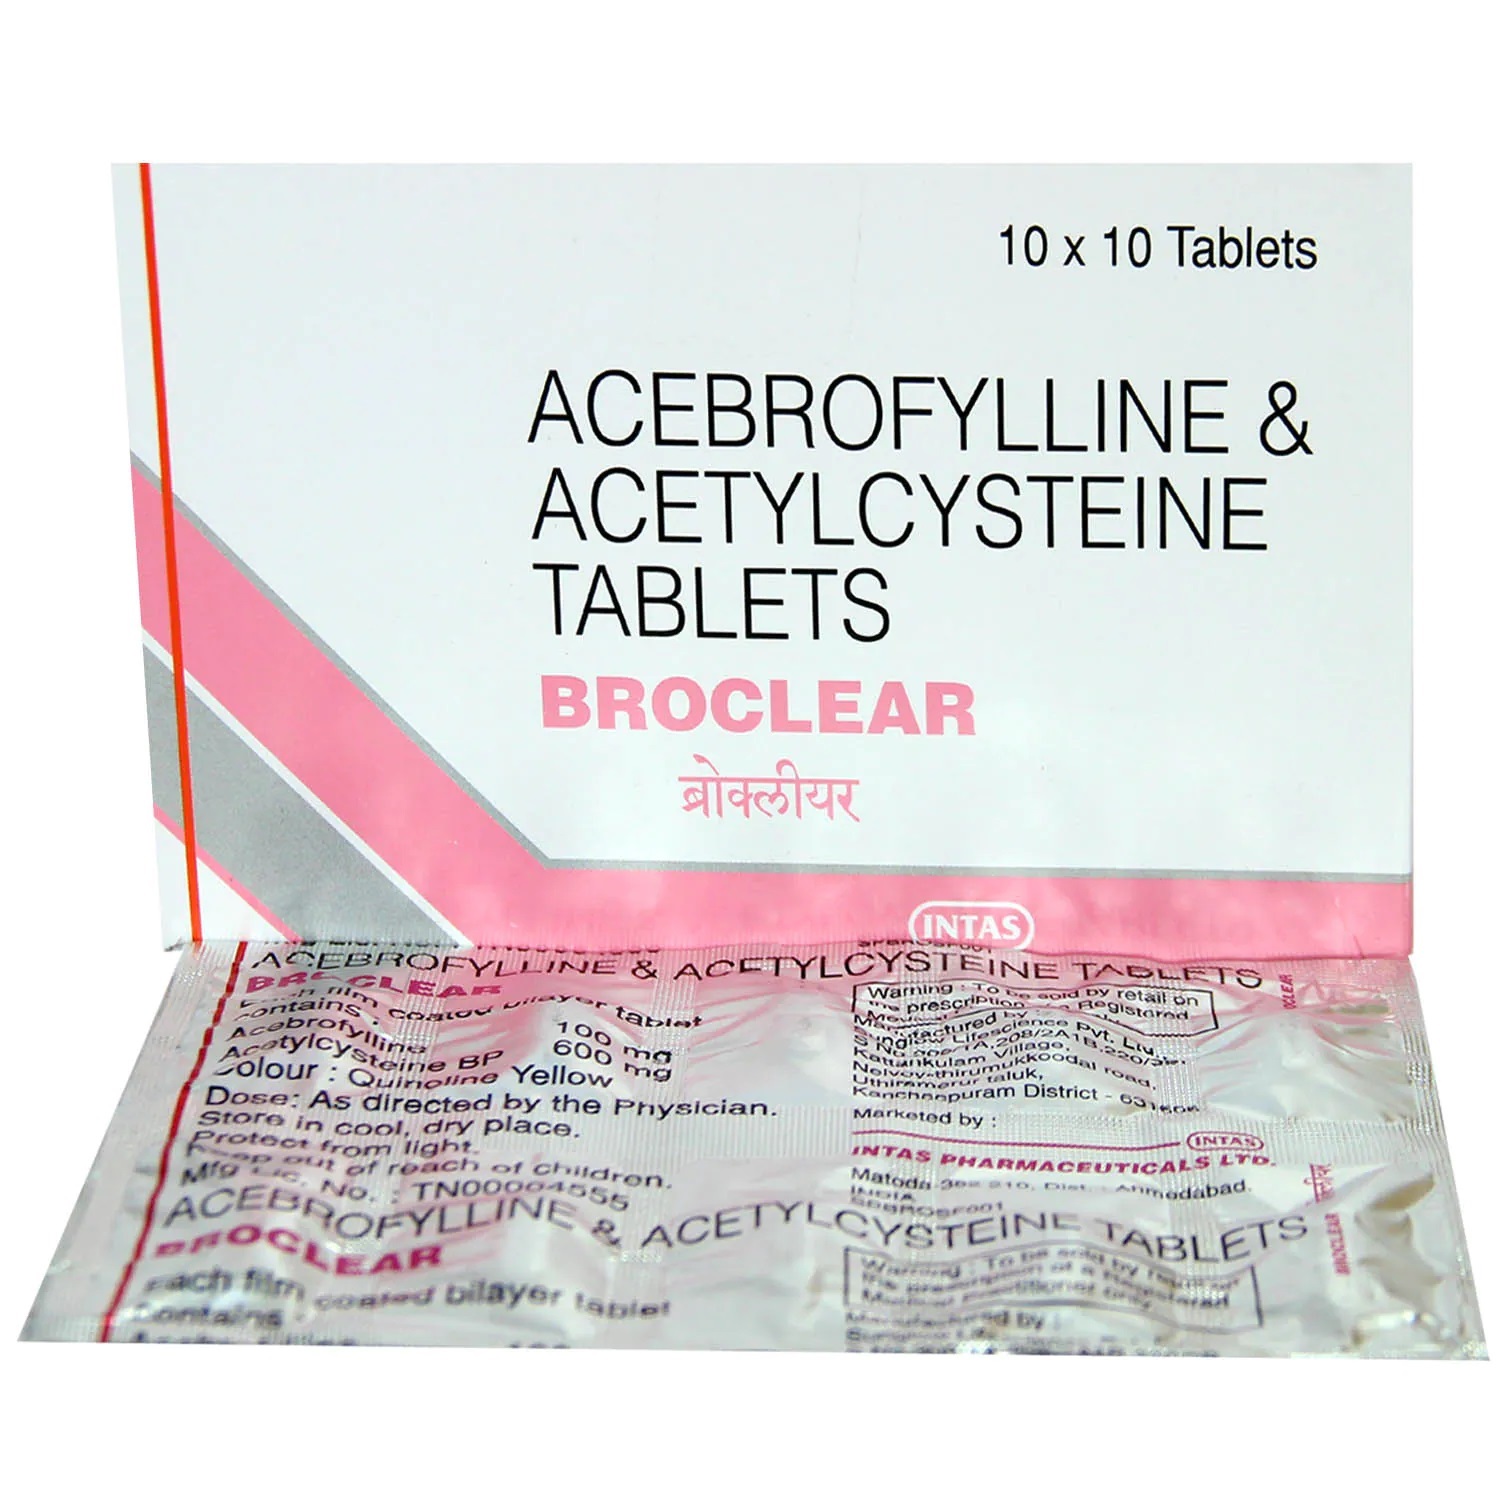 Broclear Tablet (Acebrofylline and Acetylcysteine)